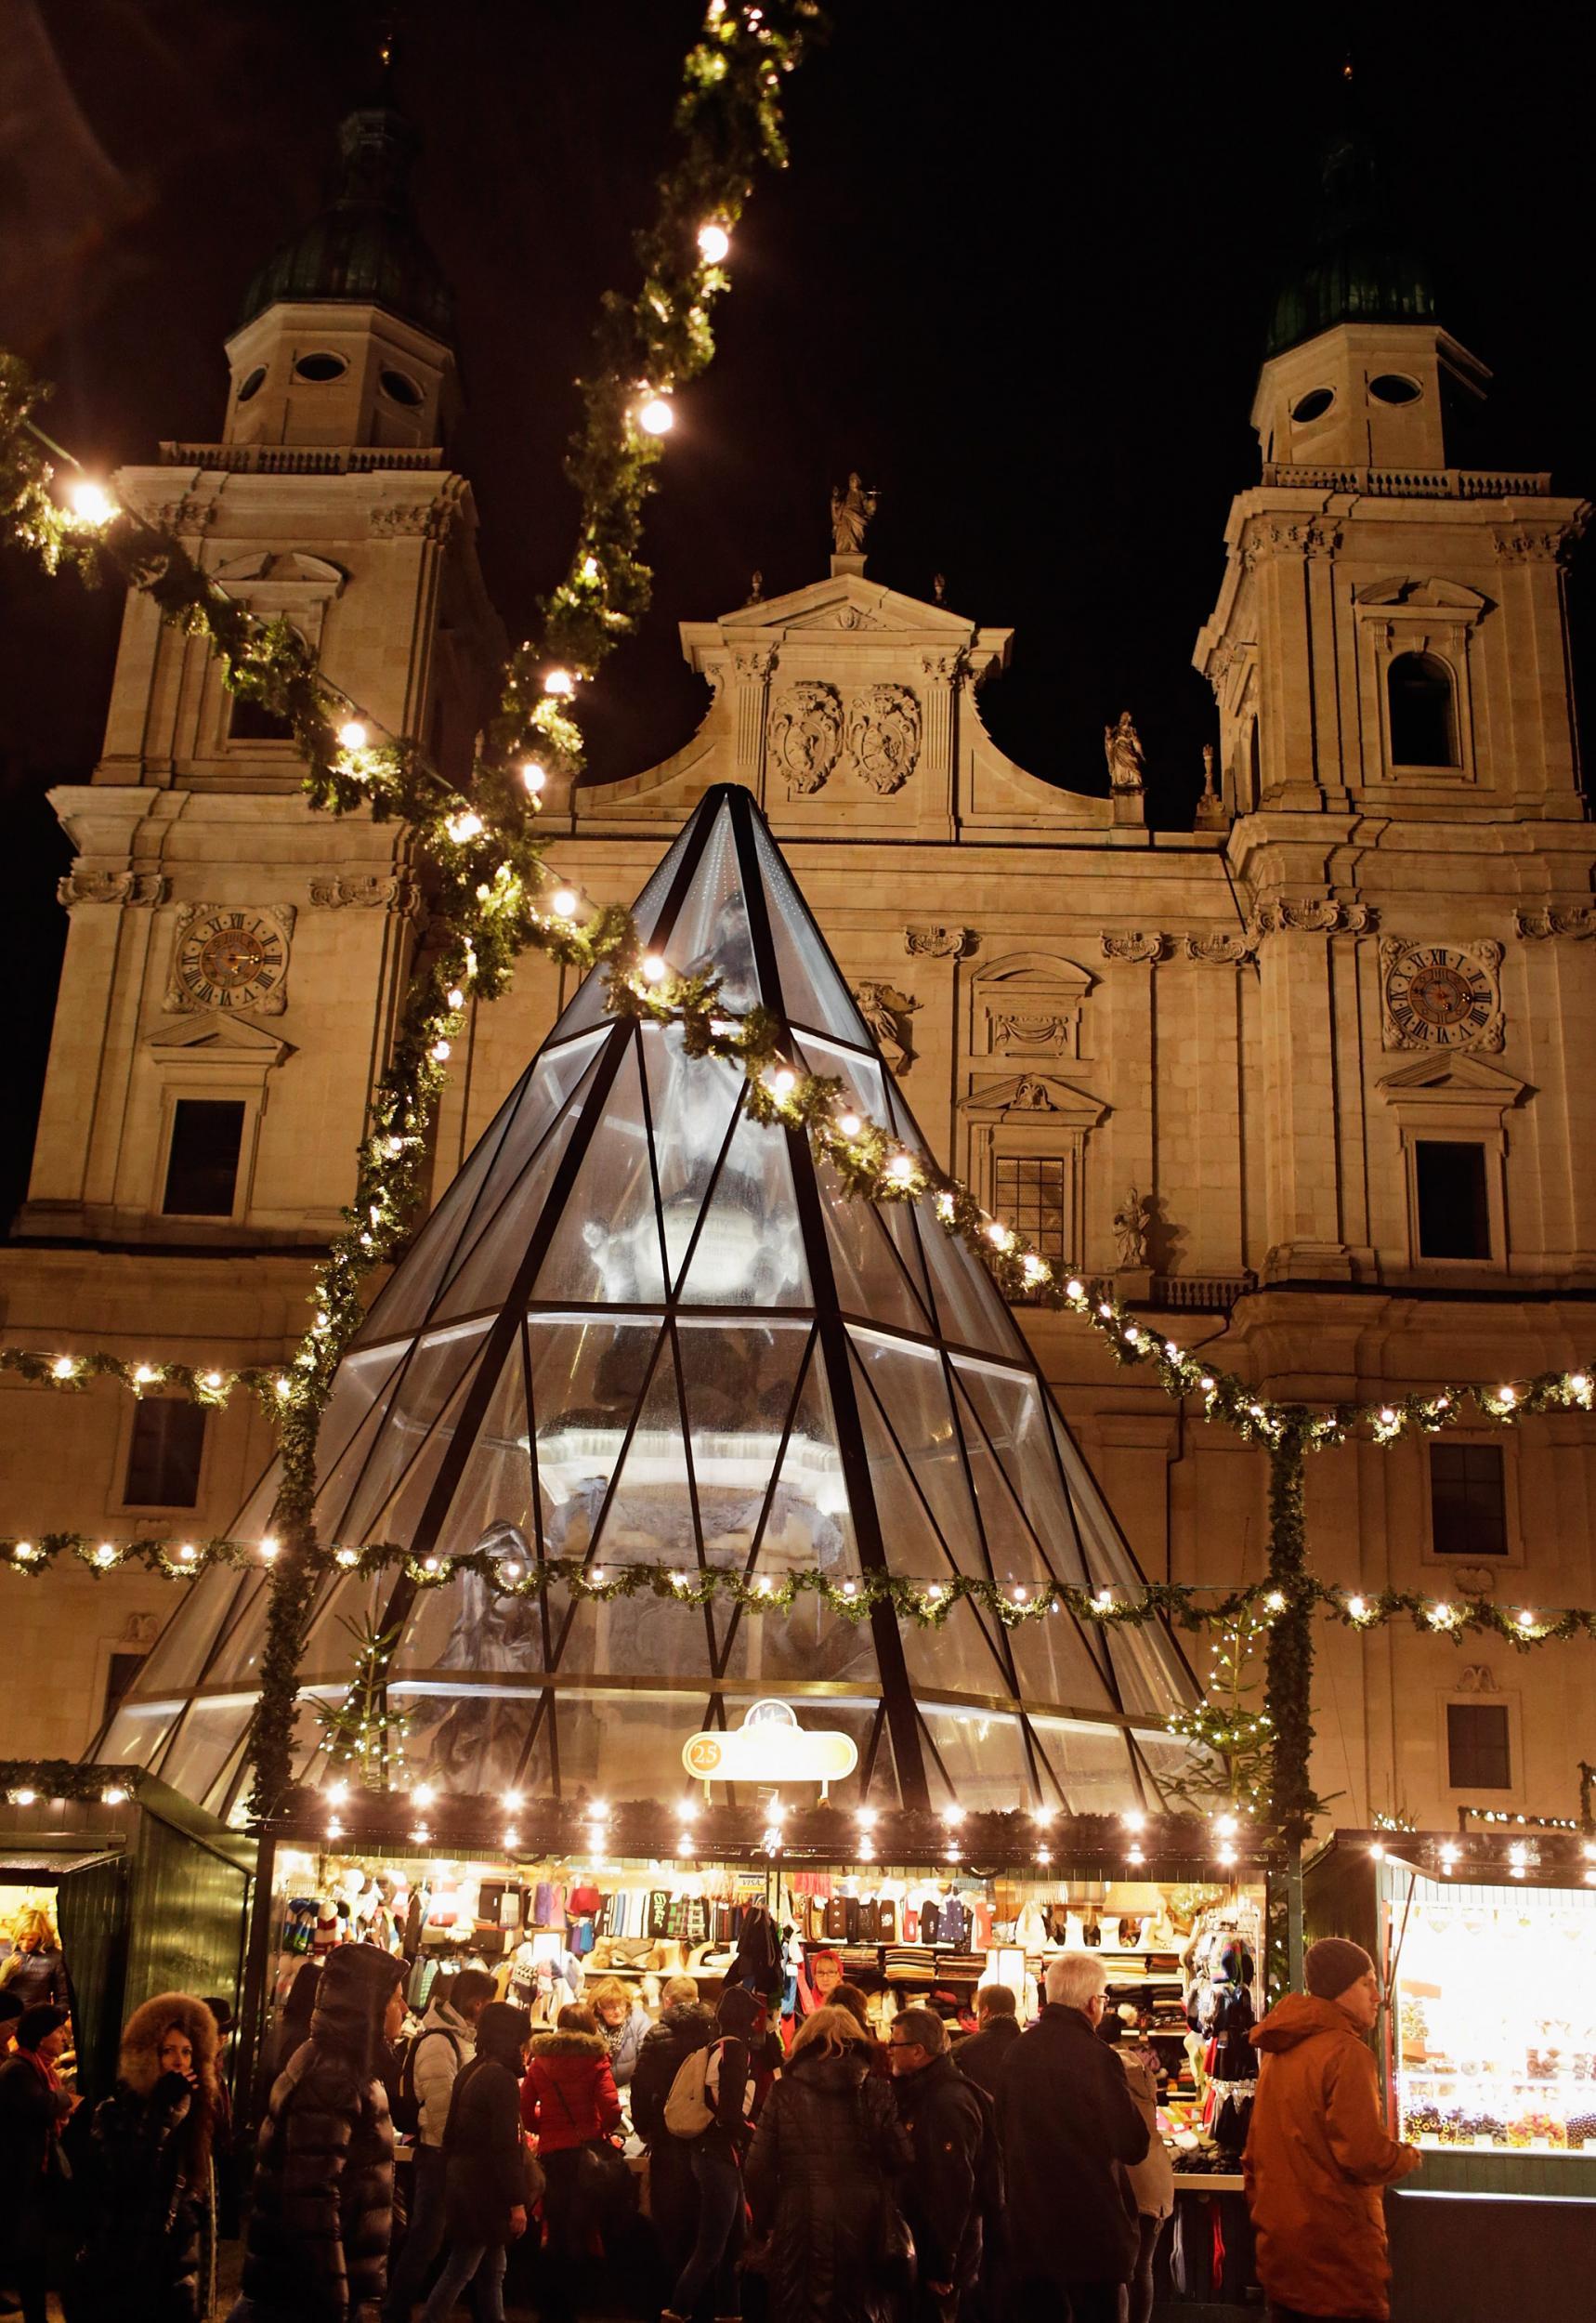 Visiting Salzburg’s Christmas market is the perfect way to get into the festival spirit